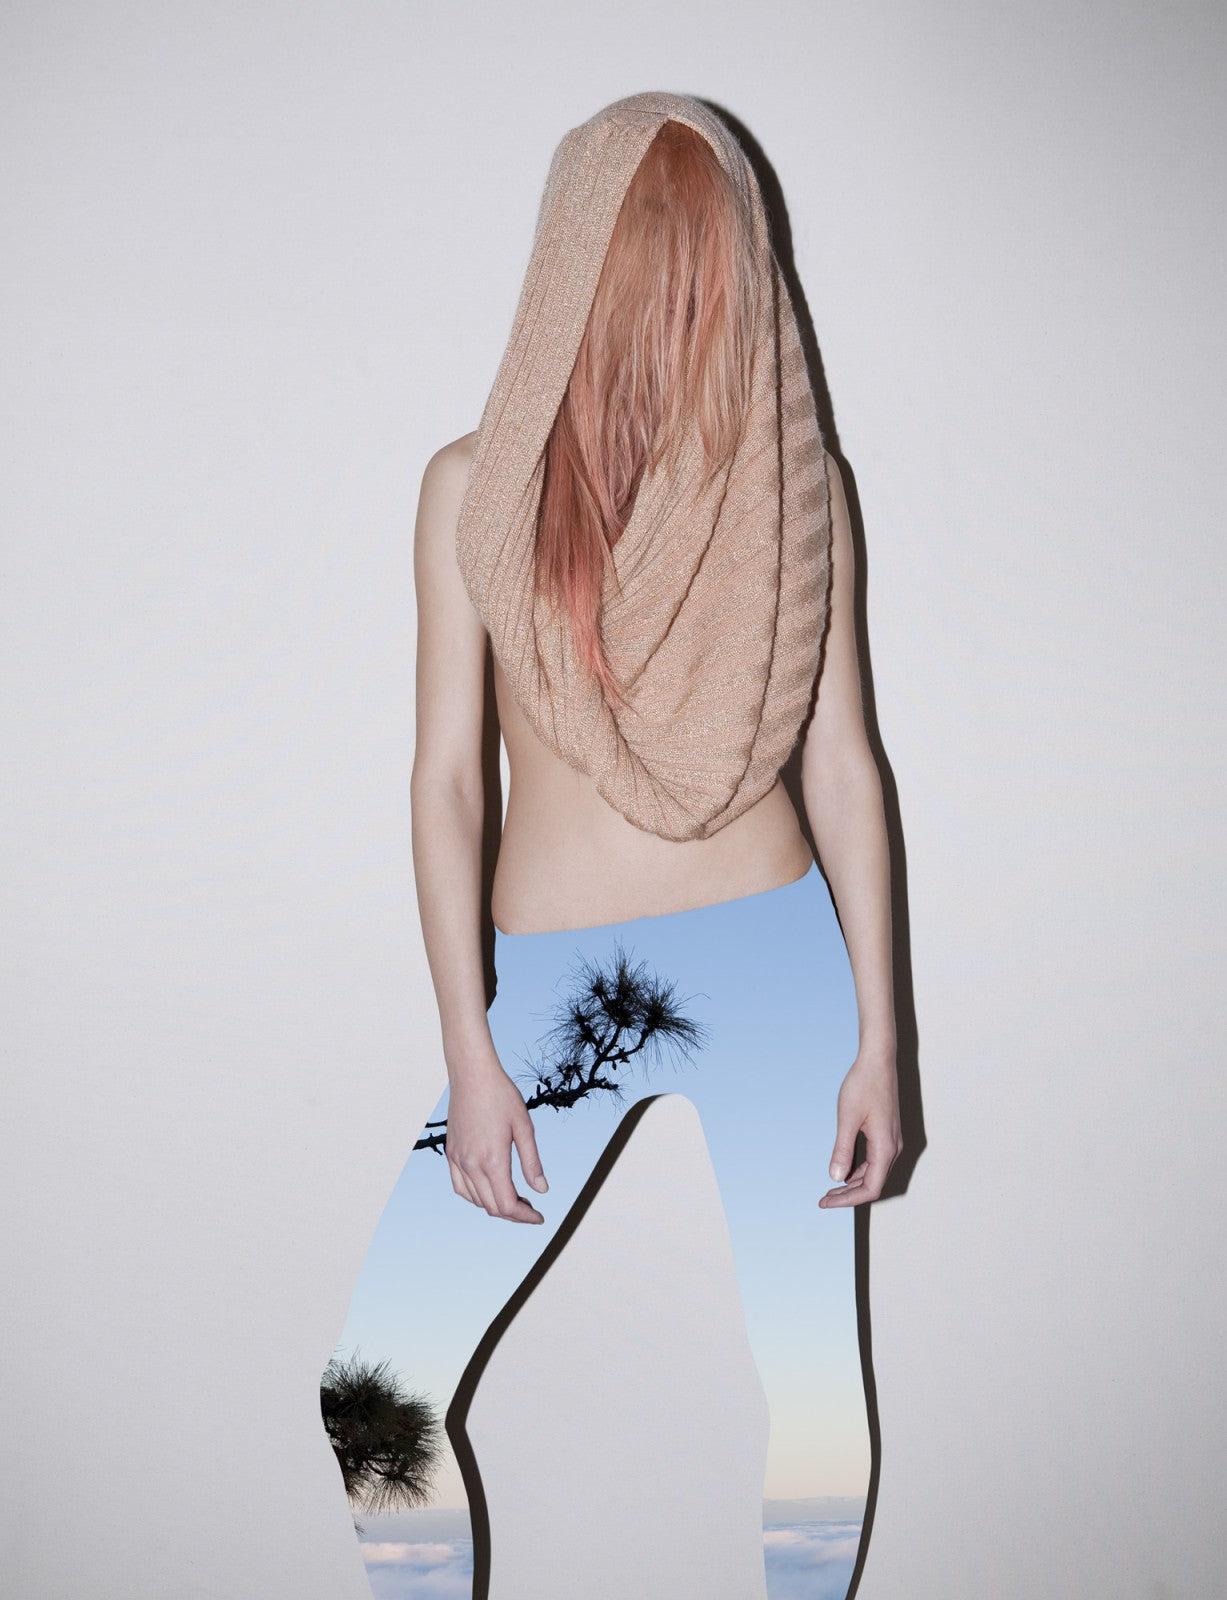 In and Out of Fashion - Viviane Sassen